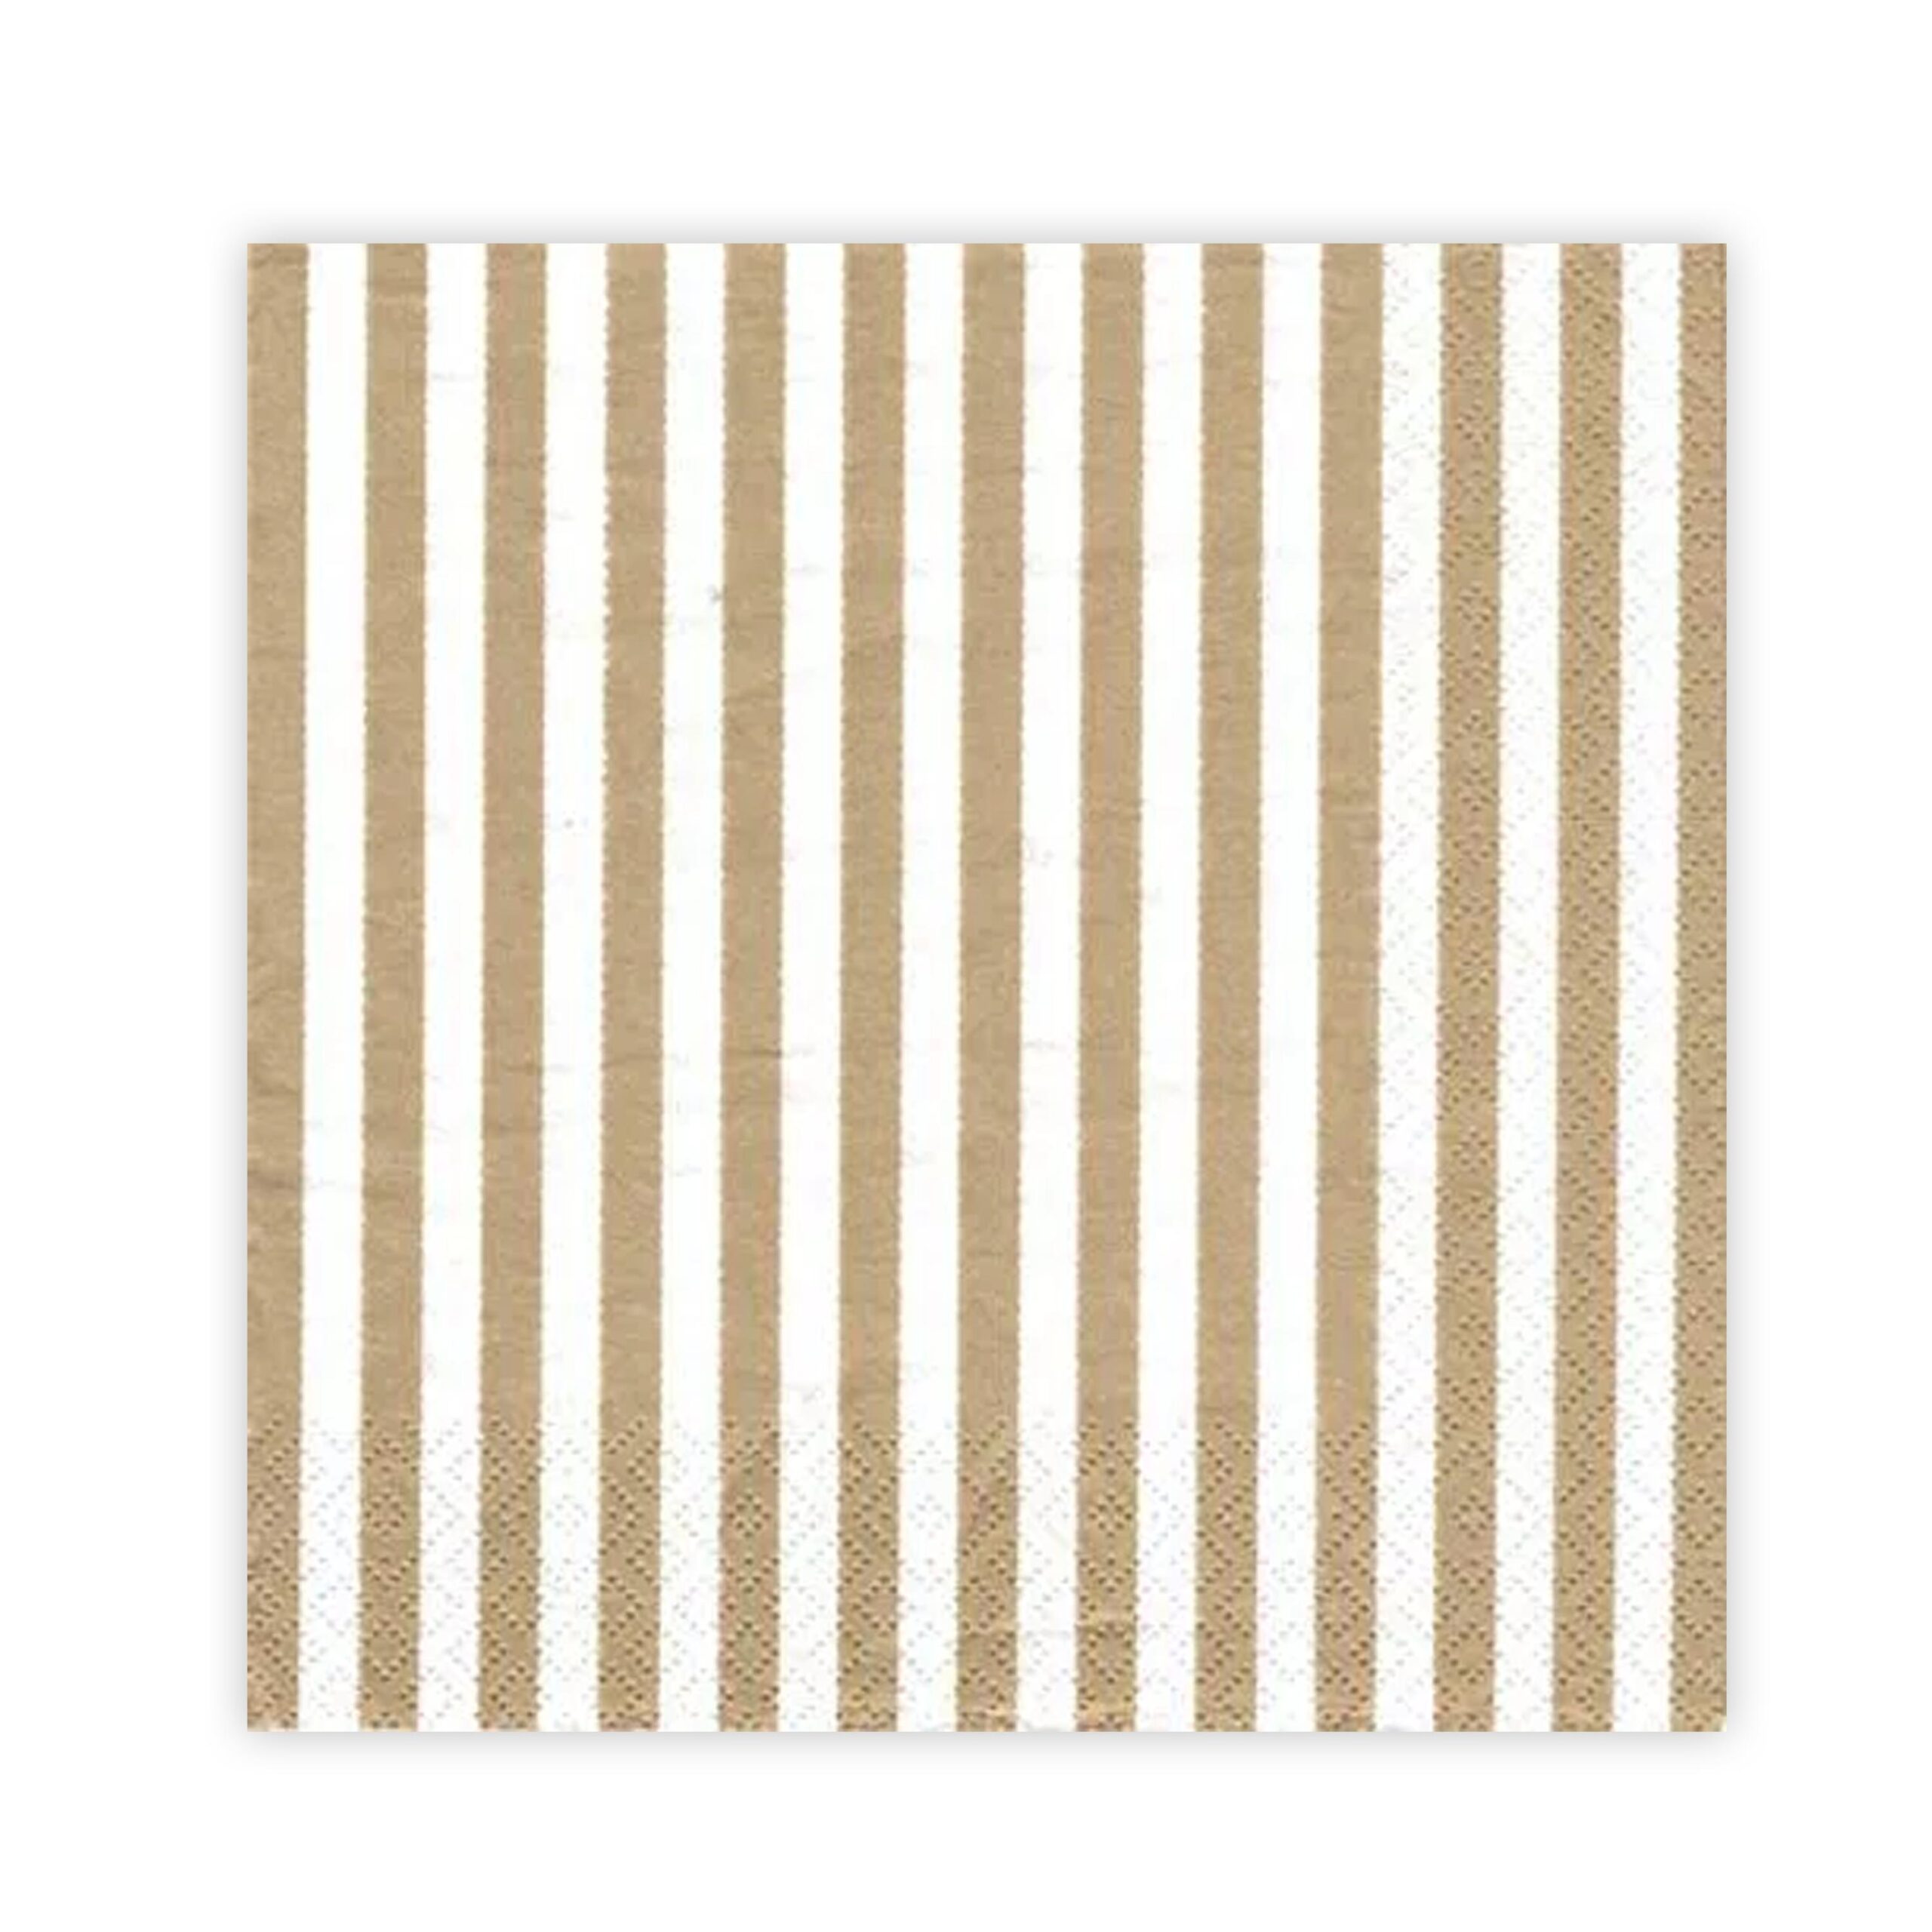 3 PLY LUNCH
SERVIETTES 33X33
CLASSIC
GOLD-WHITE  20s